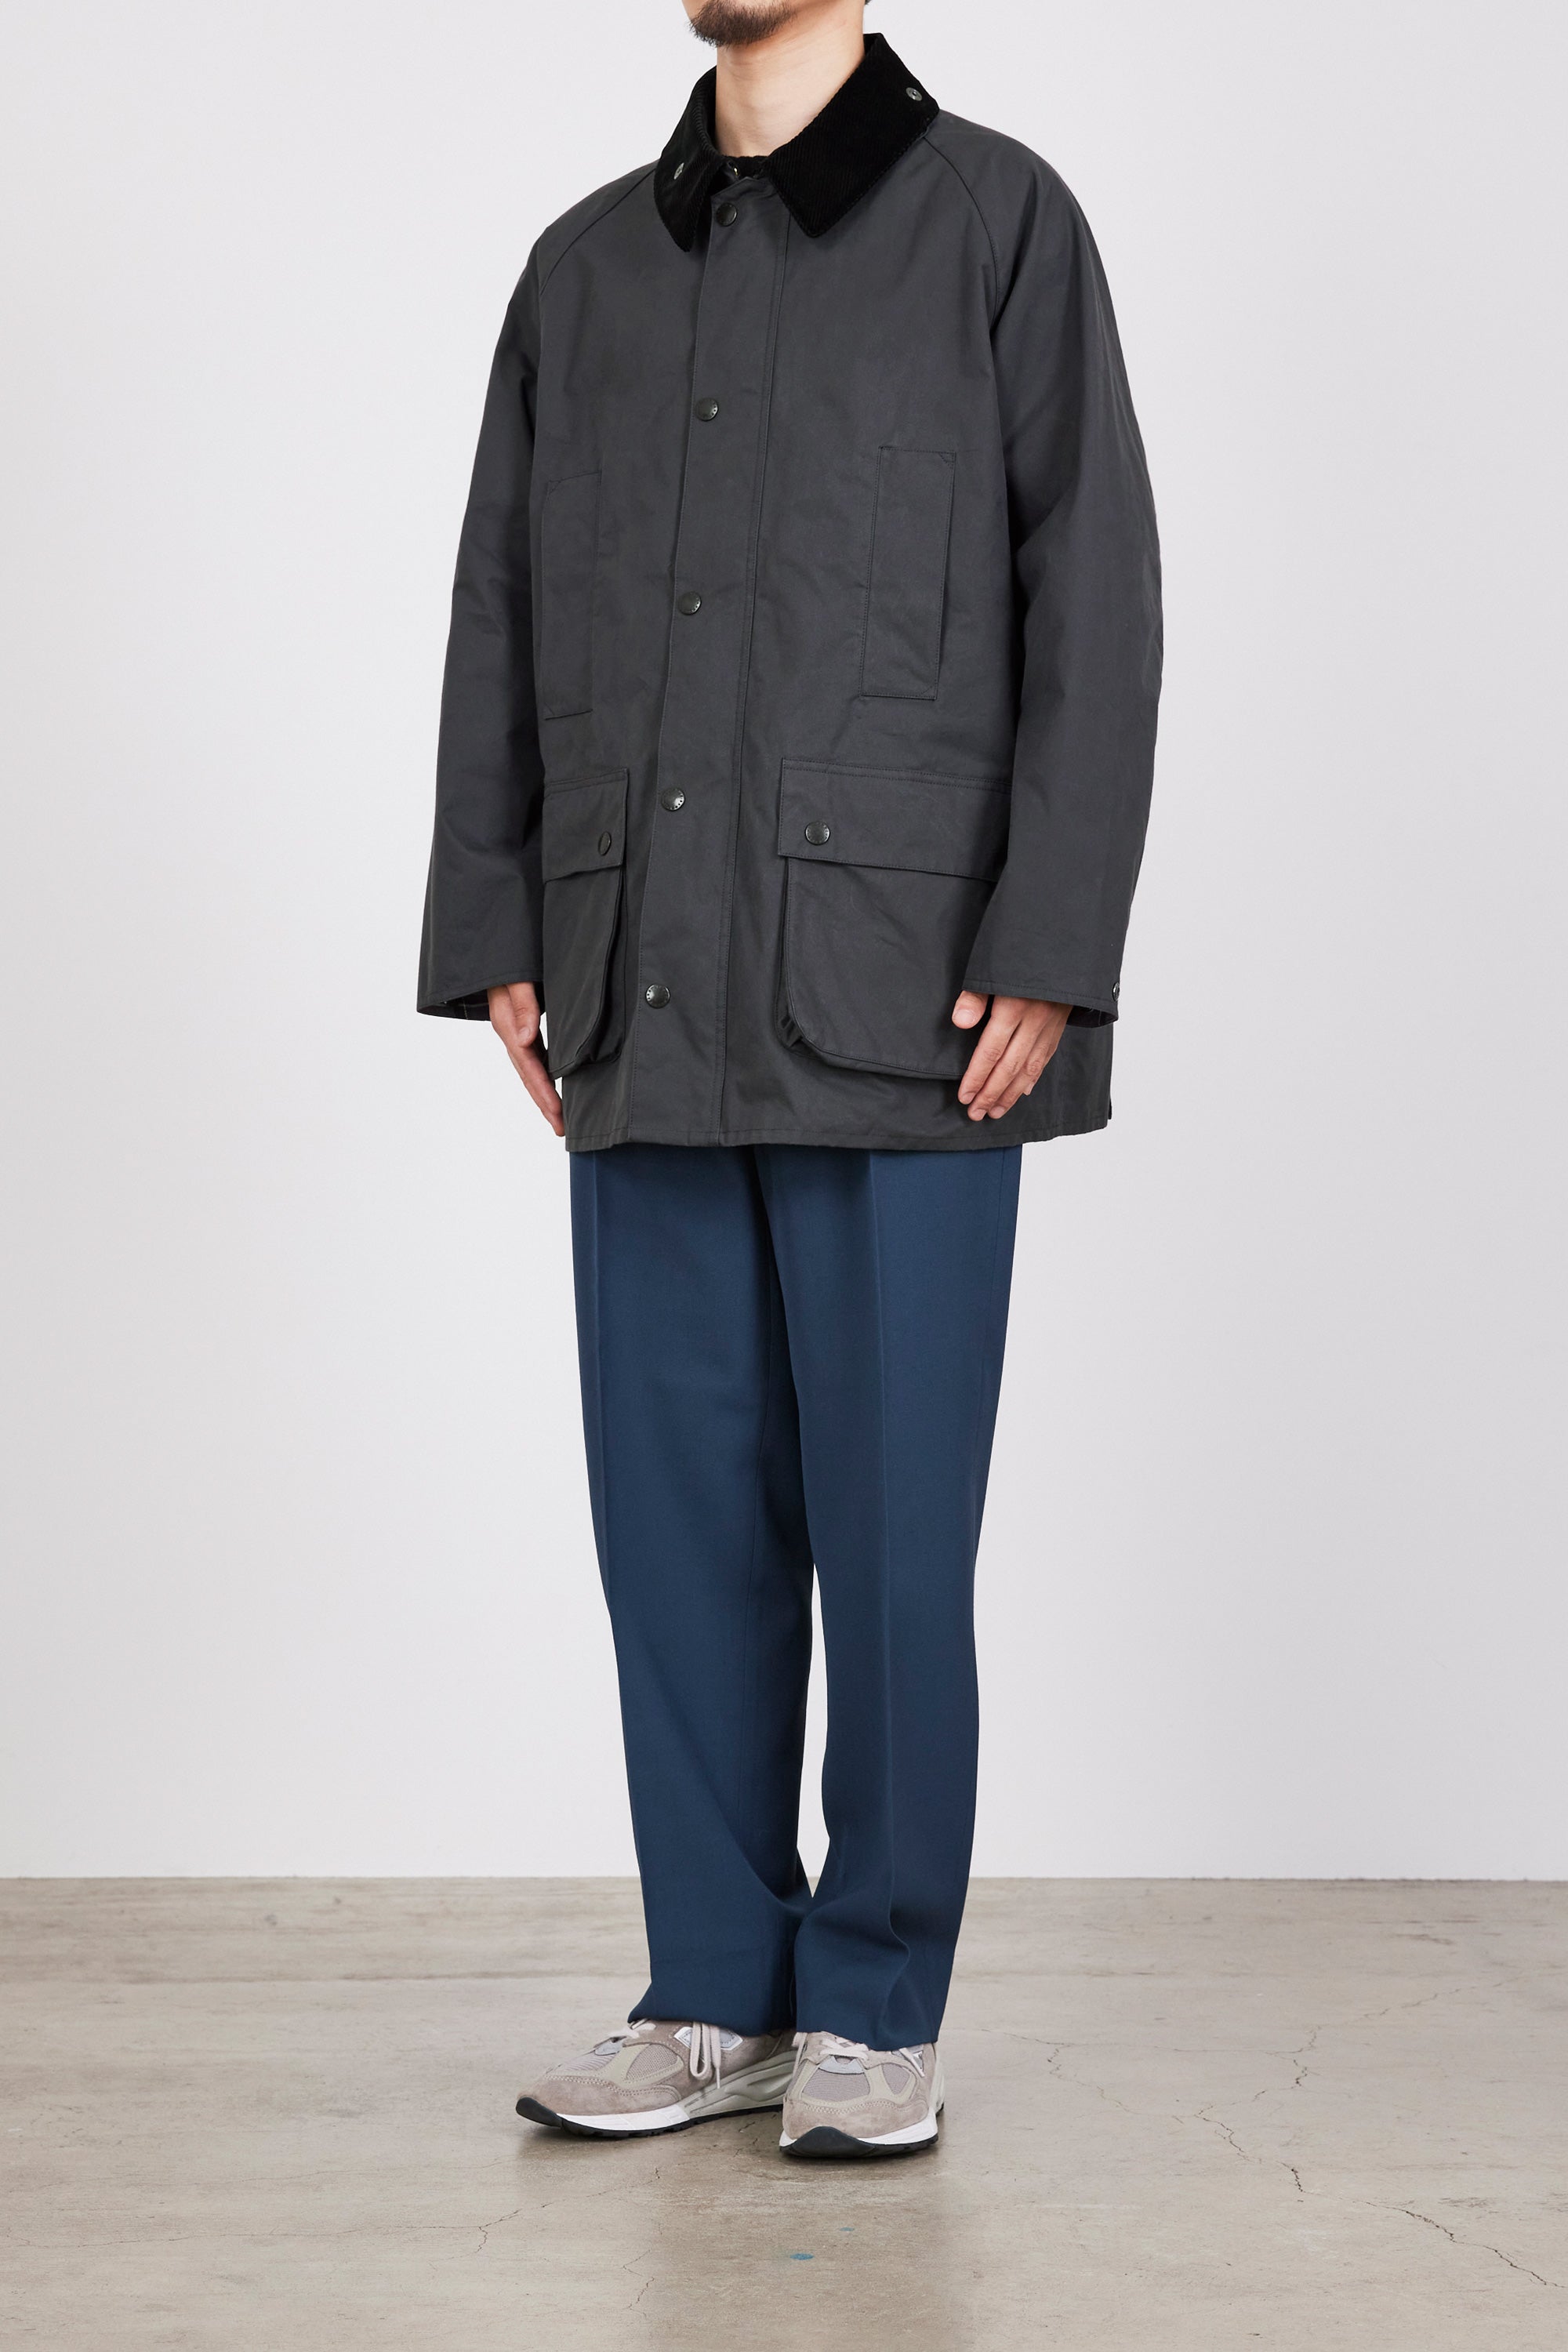 Barbour x MARKAWARE for EDIFICE BEDALE, Grey